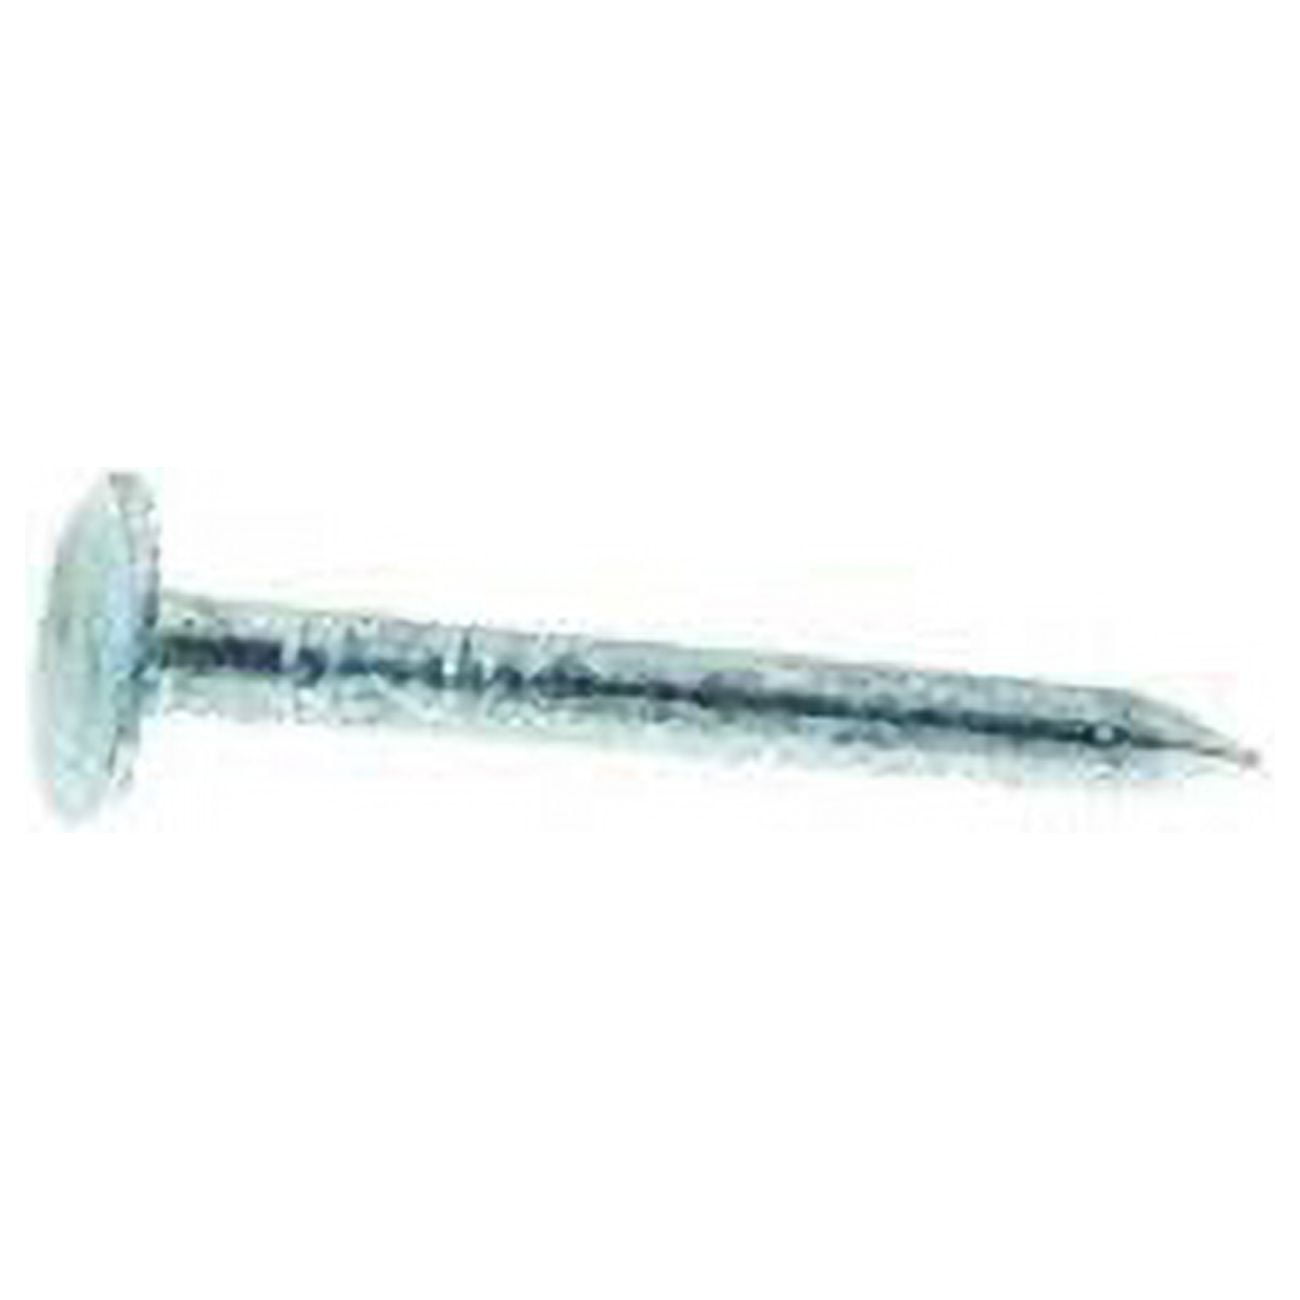 Picture of Grip-Rite 5025225 1 lbs 1 in. Roofing Hot-Dipped Galvanized Steel Nail Smooth with Shank Flat - Pack of 12